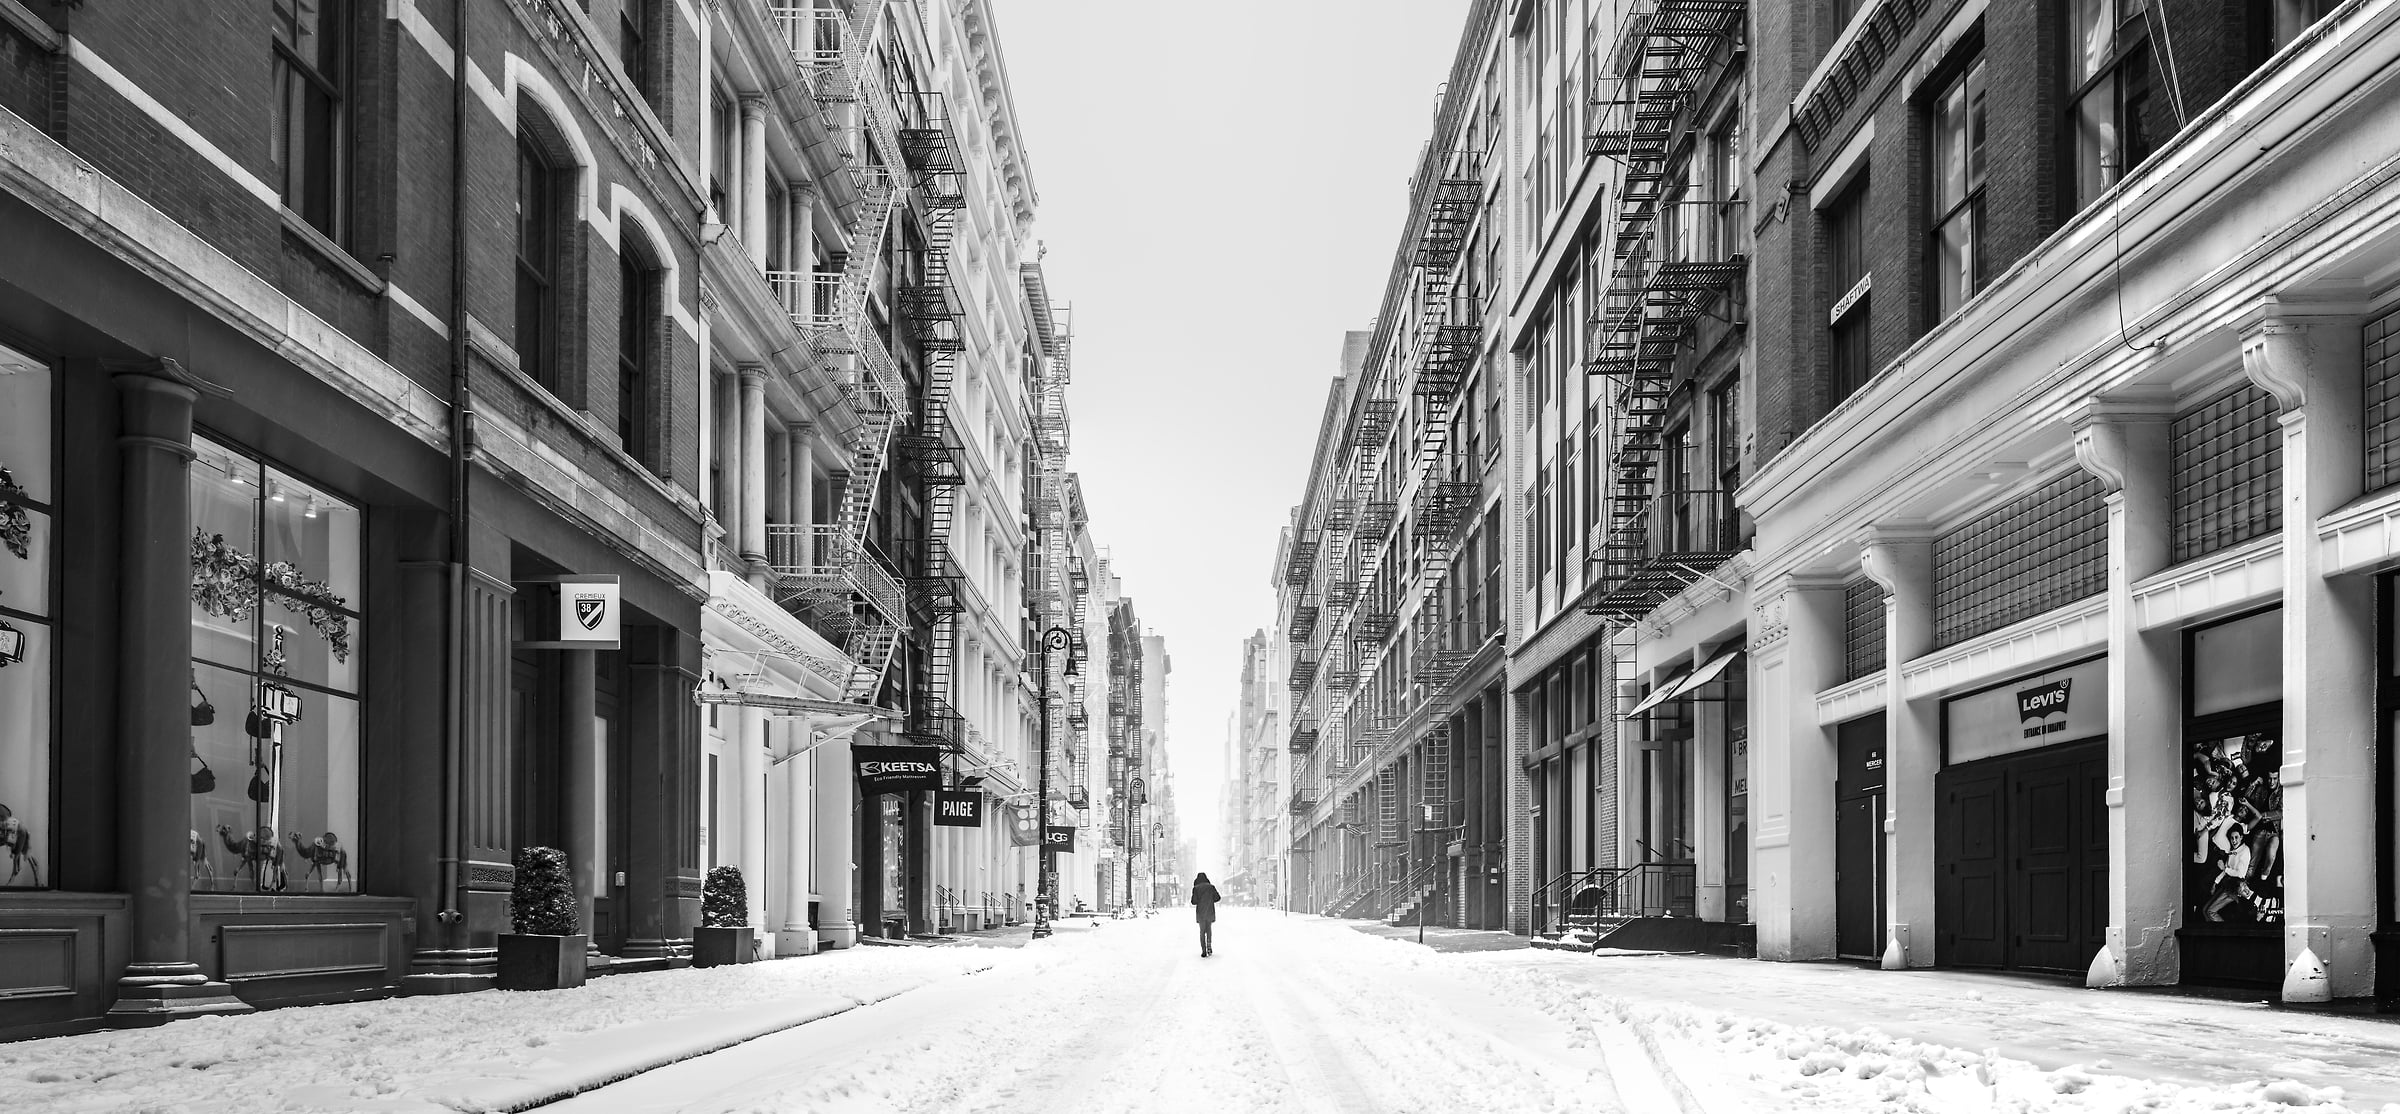 268 megapixels! A very high definition, large-format VAST photo print of Mercer Street in SoHo in NYC in winter snow; black and white fine art street photo created by Dan Piech in New York City.